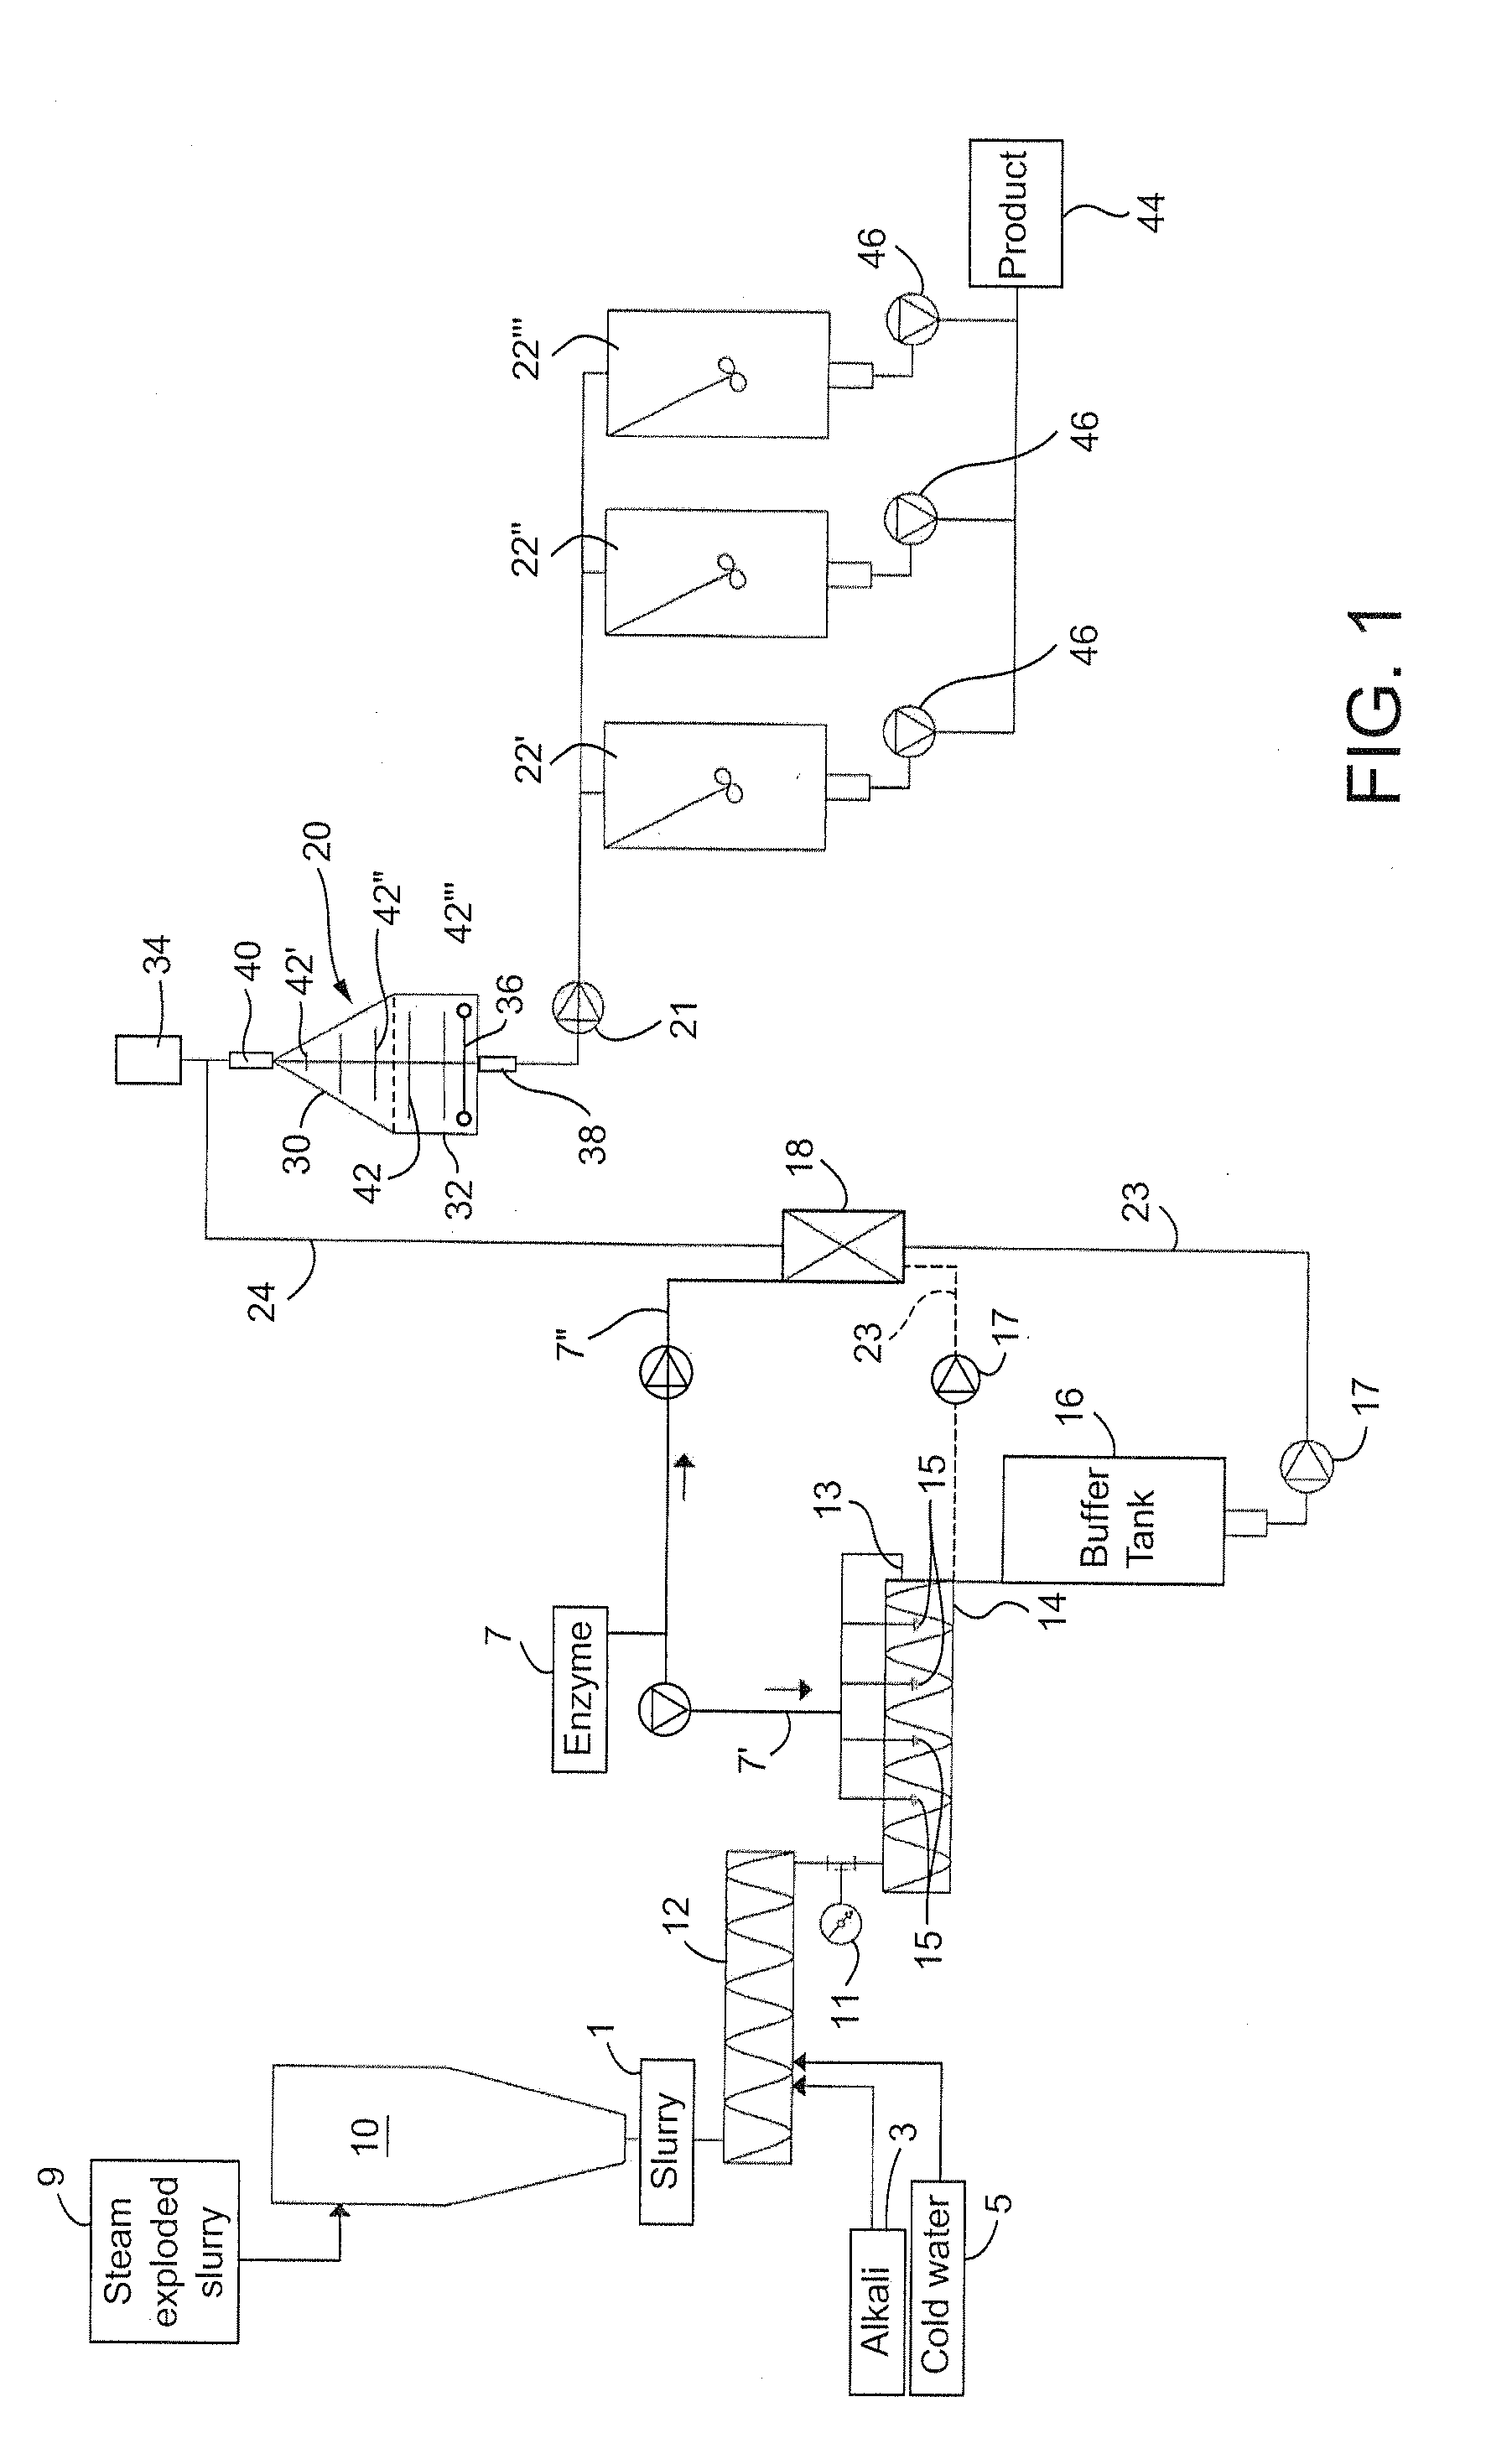 Method and apparatus for mixing a lignocellulosic material with enzymes